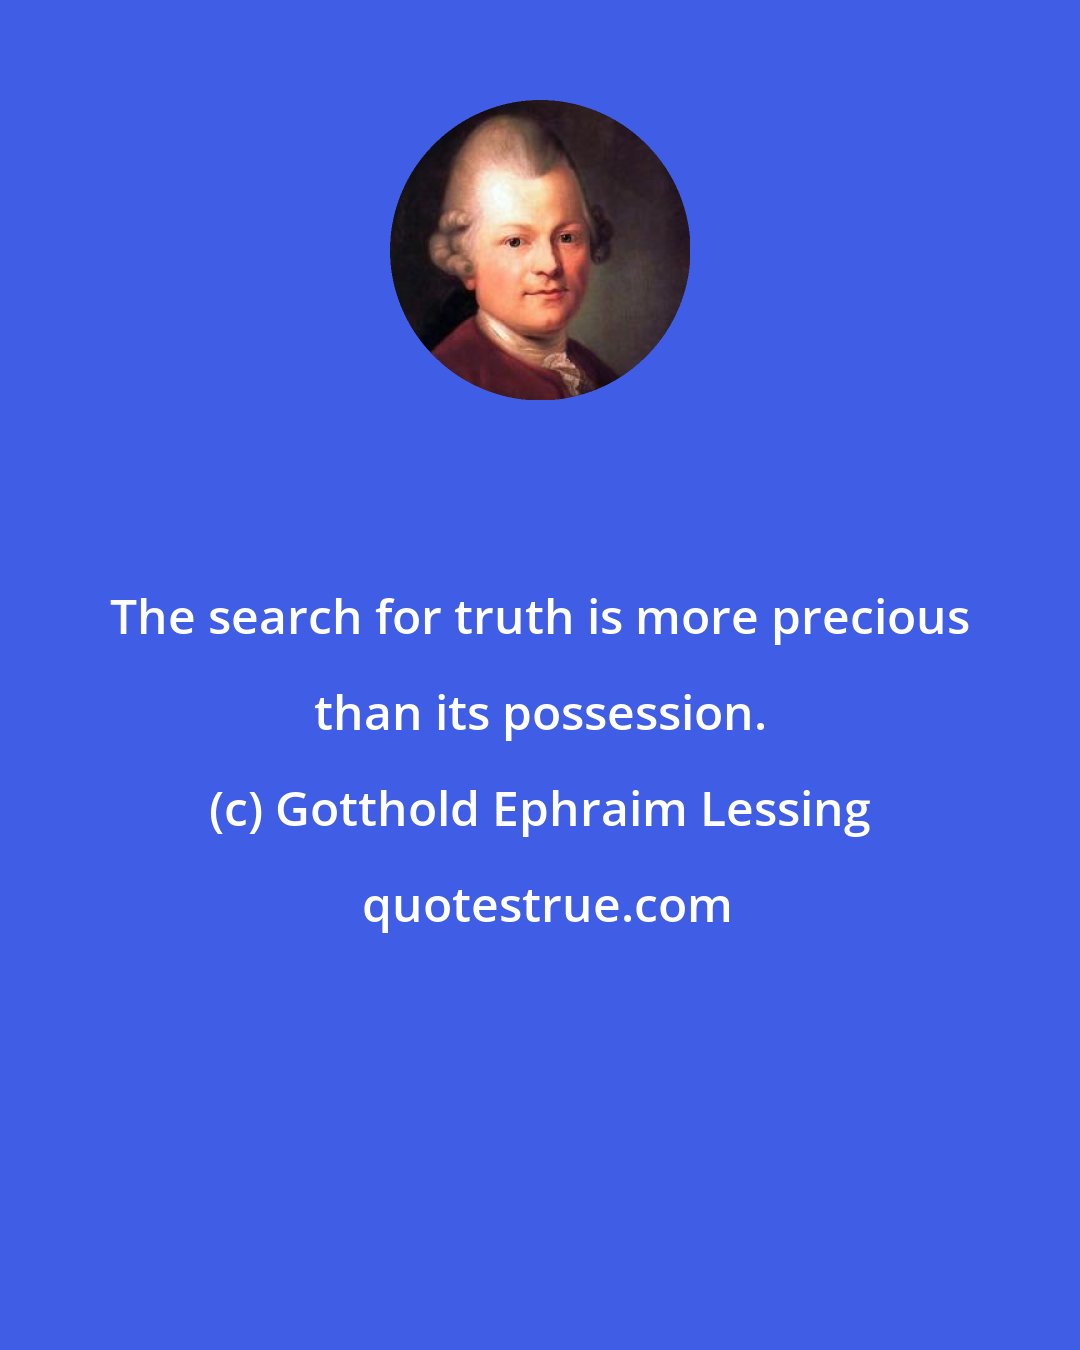 Gotthold Ephraim Lessing: The search for truth is more precious than its possession.